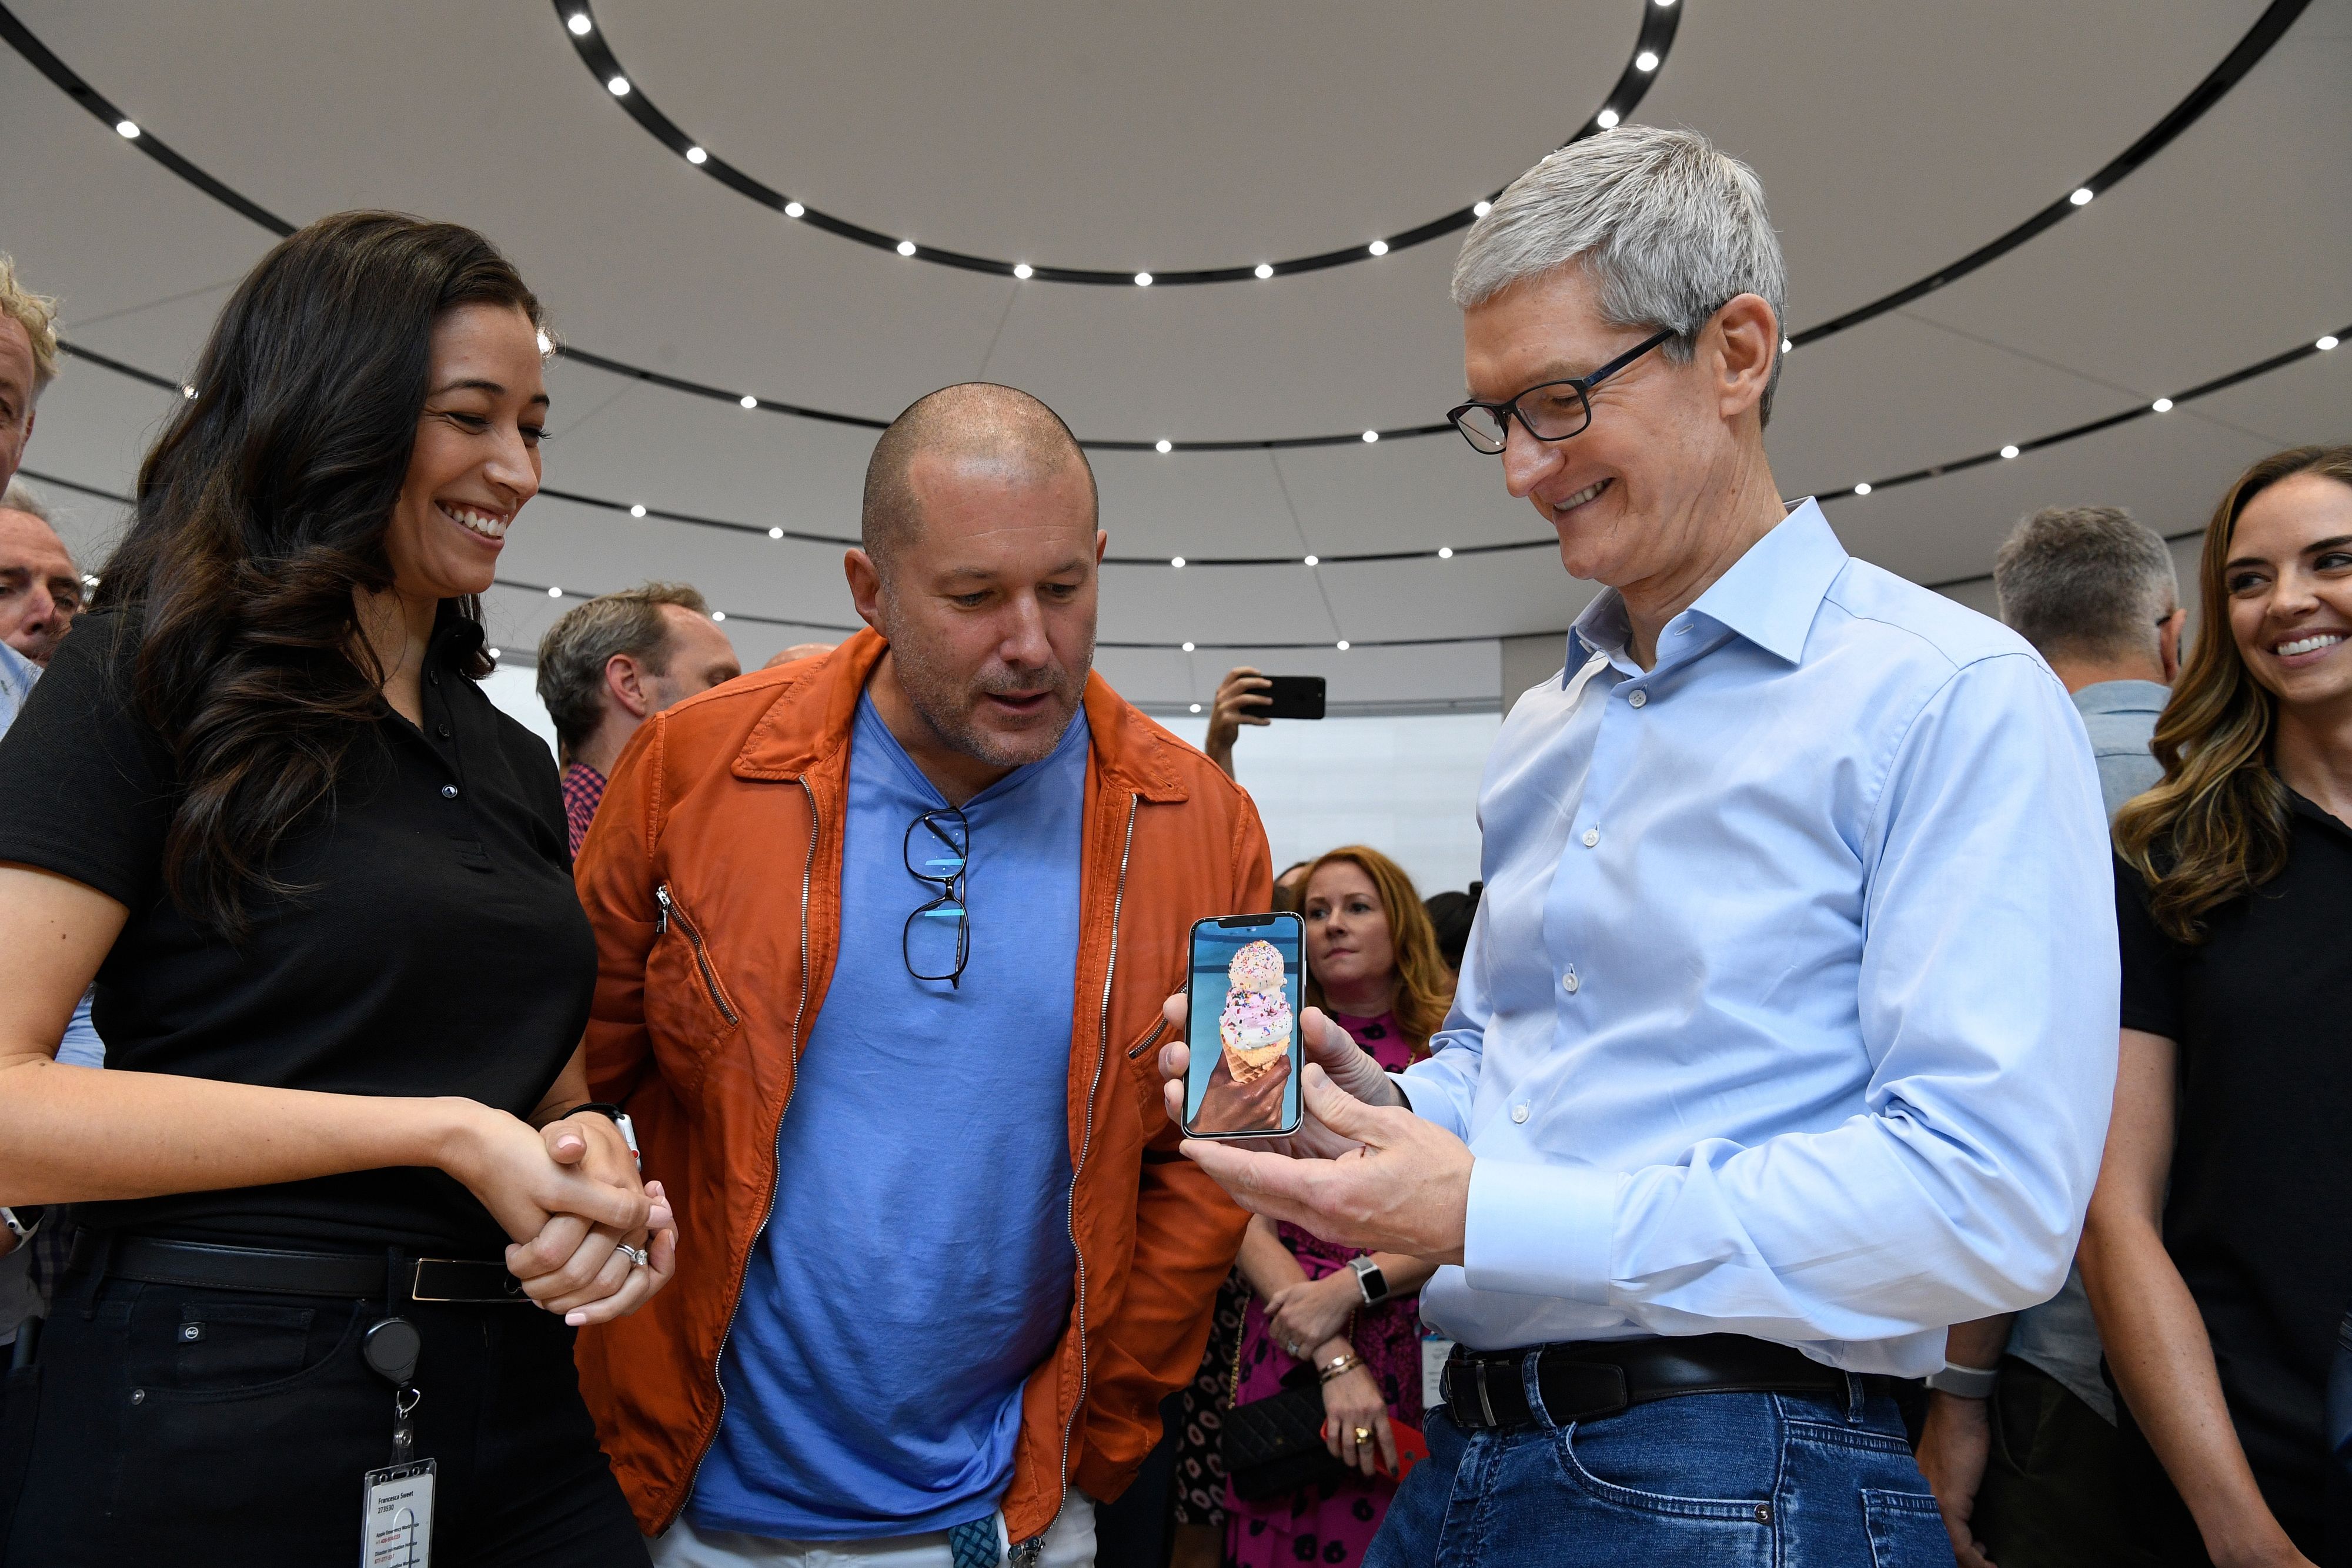 Jony Ive's departure marks the end of the hardware era at Apple